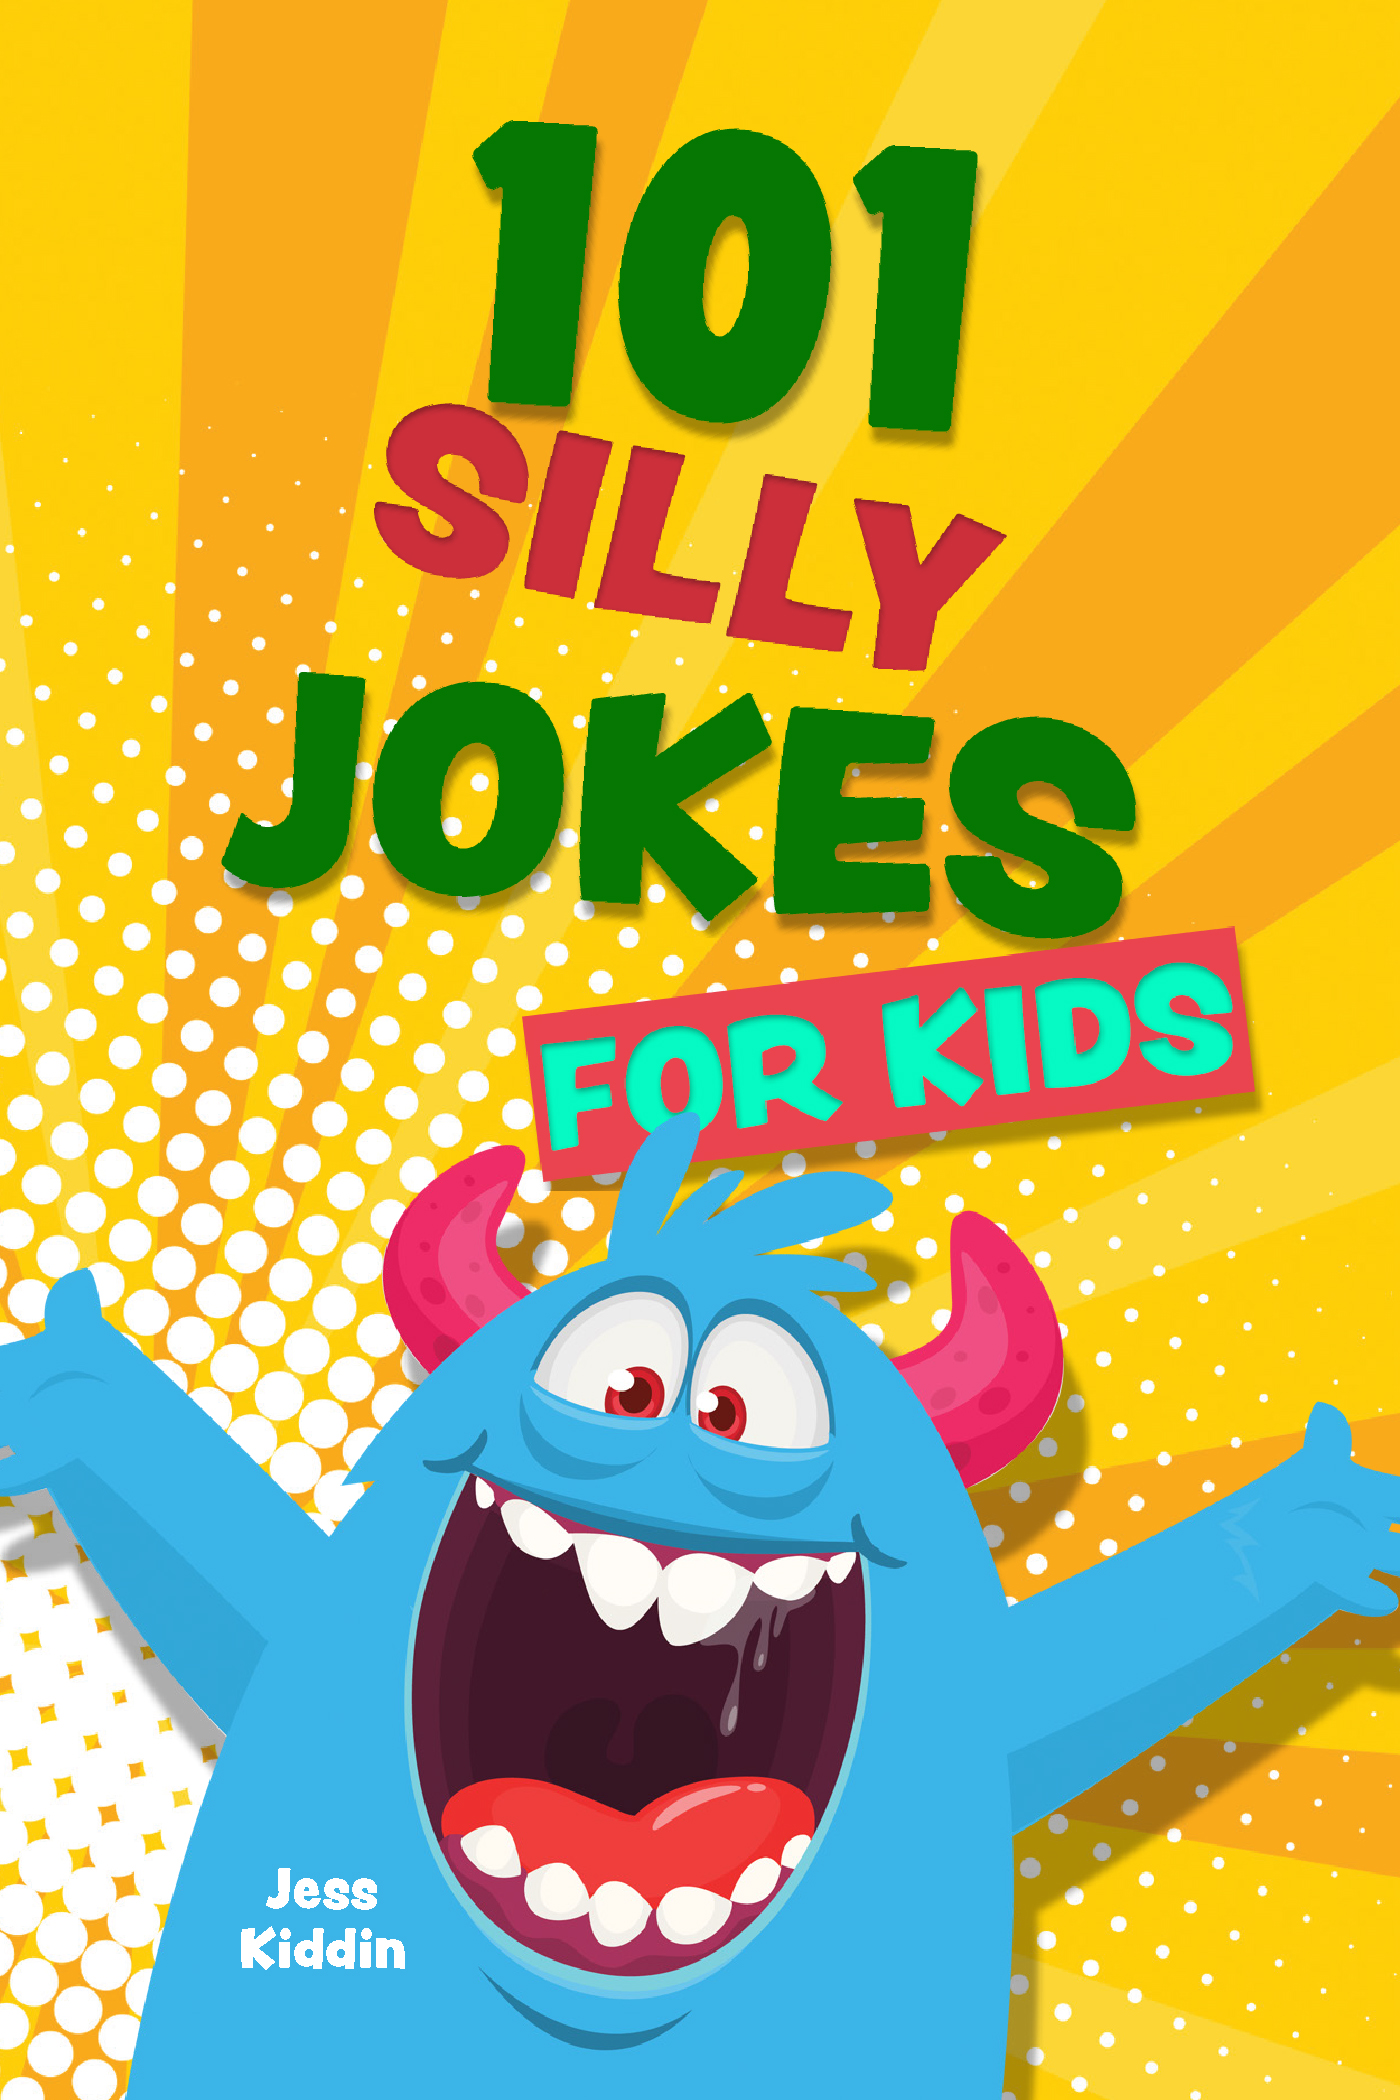 101 Silly Jokes for Kids-front.indd